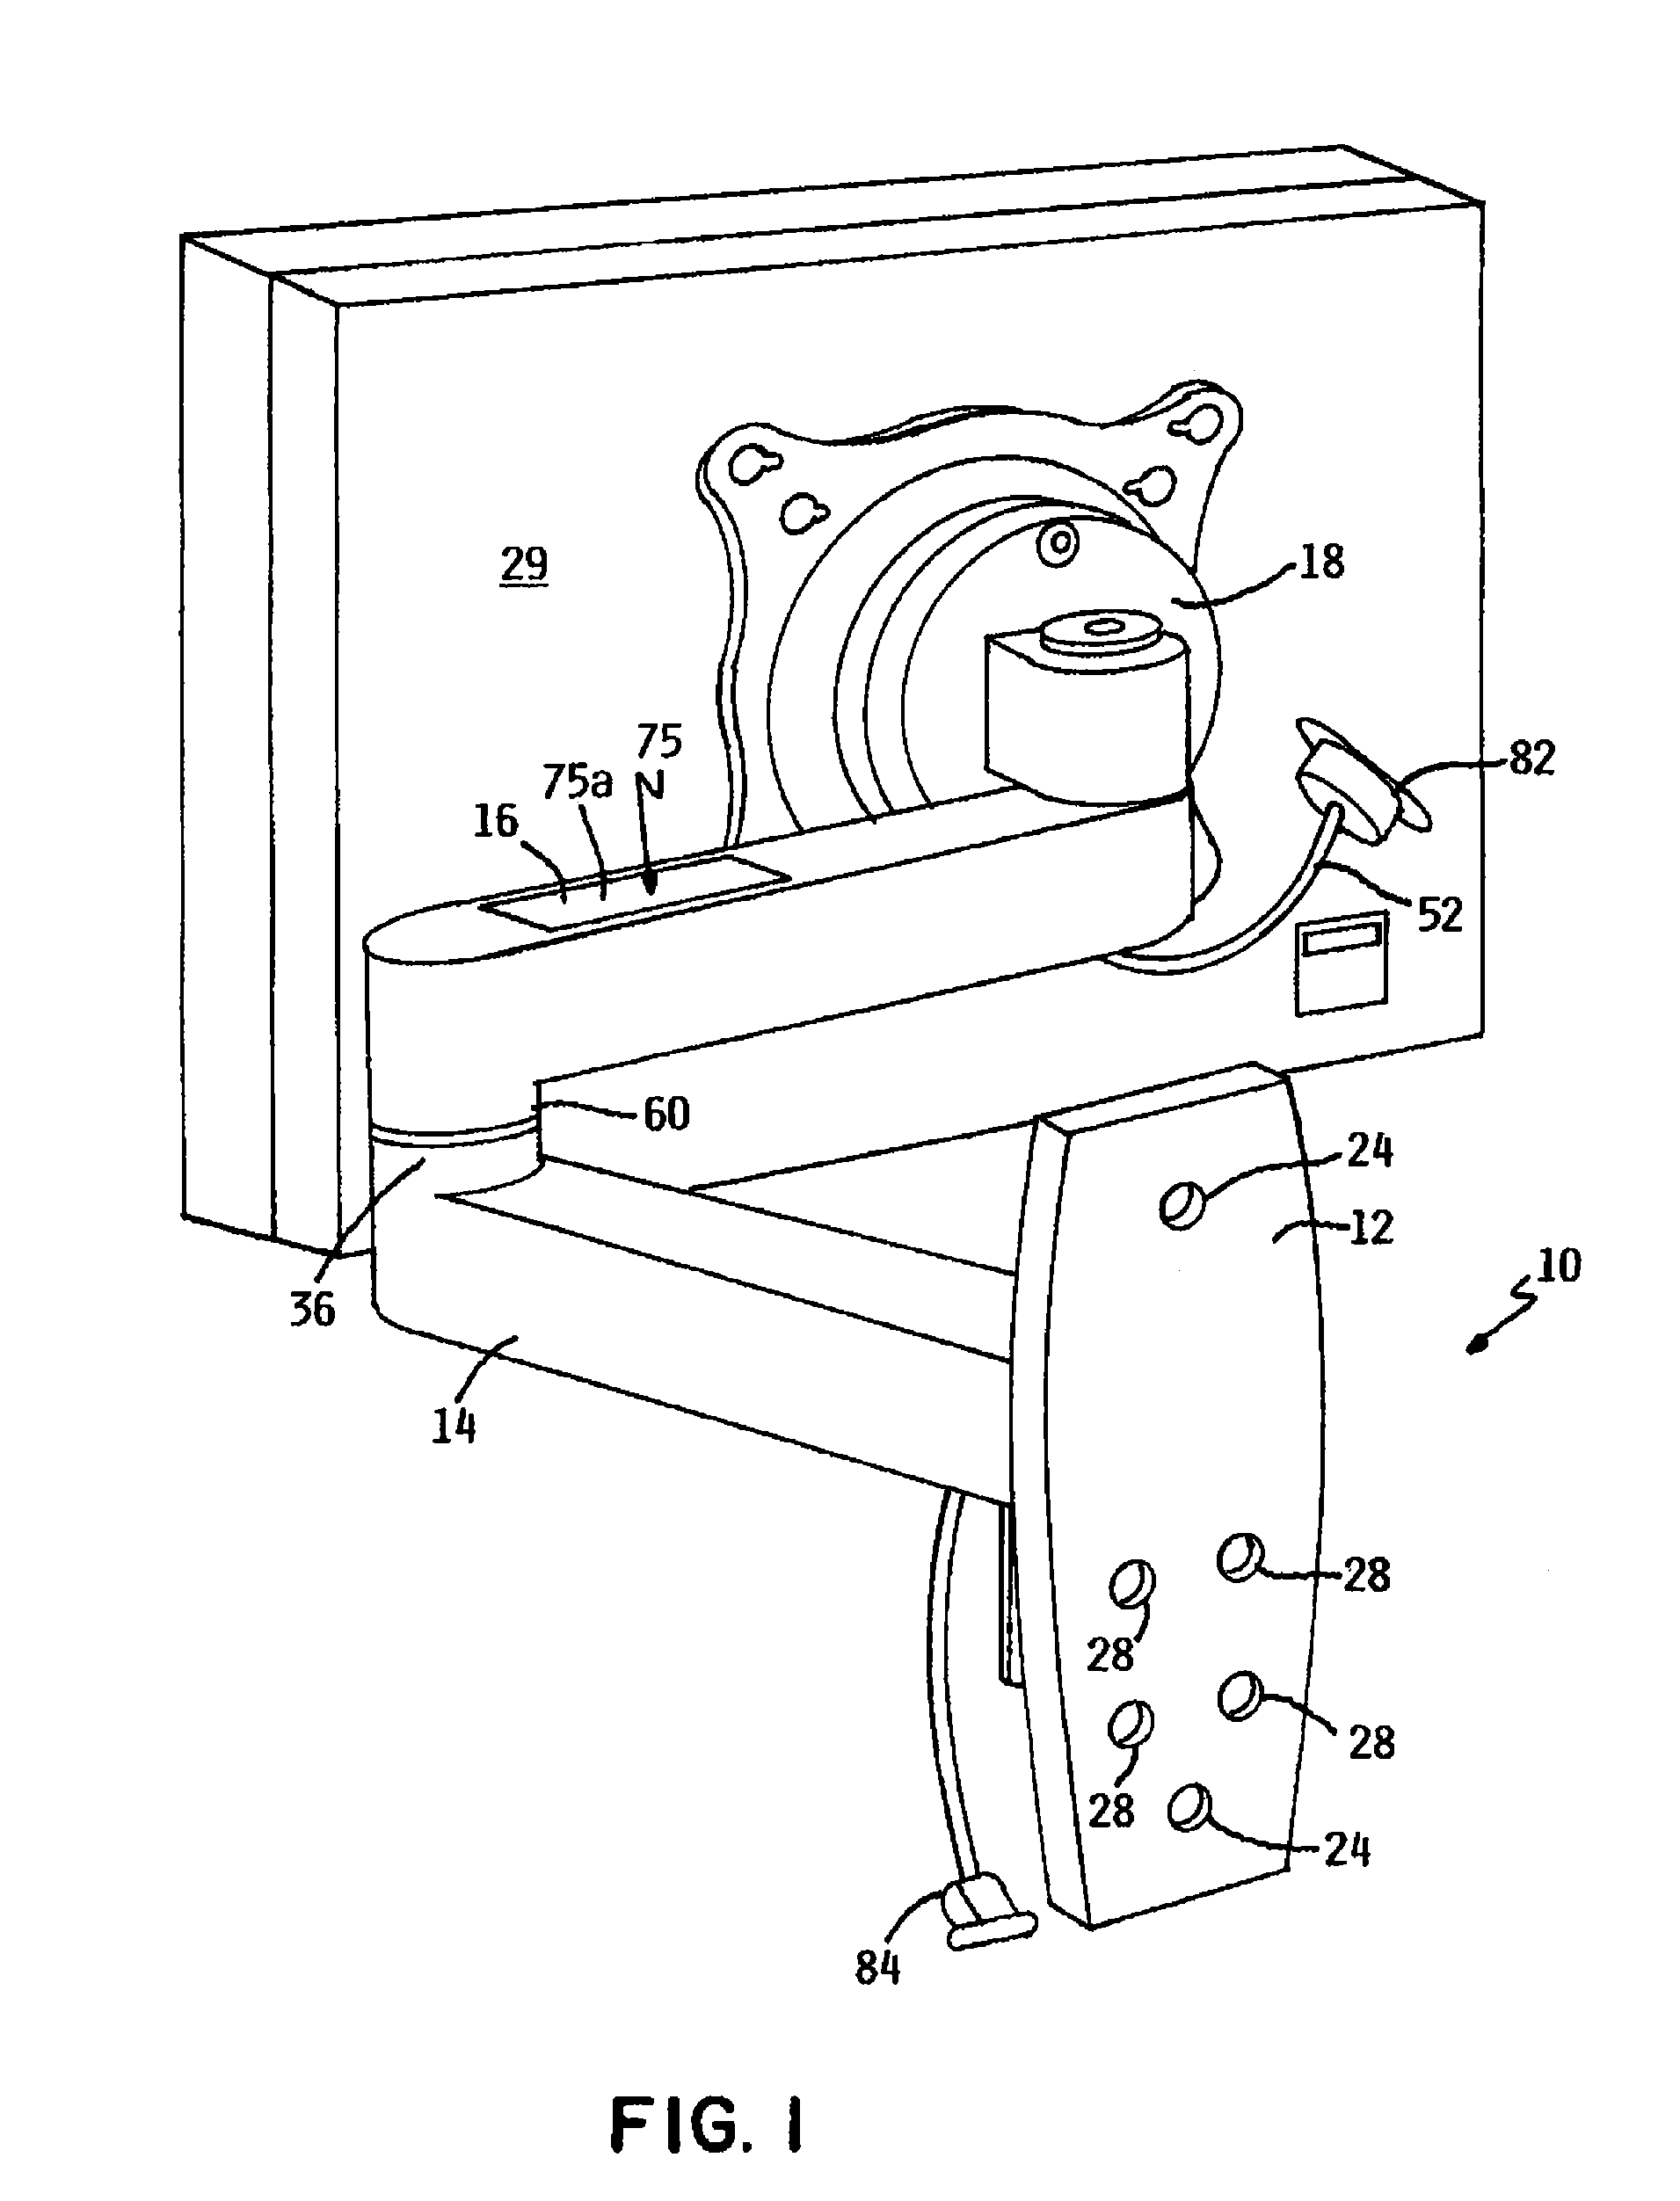 Mount and electronic display system